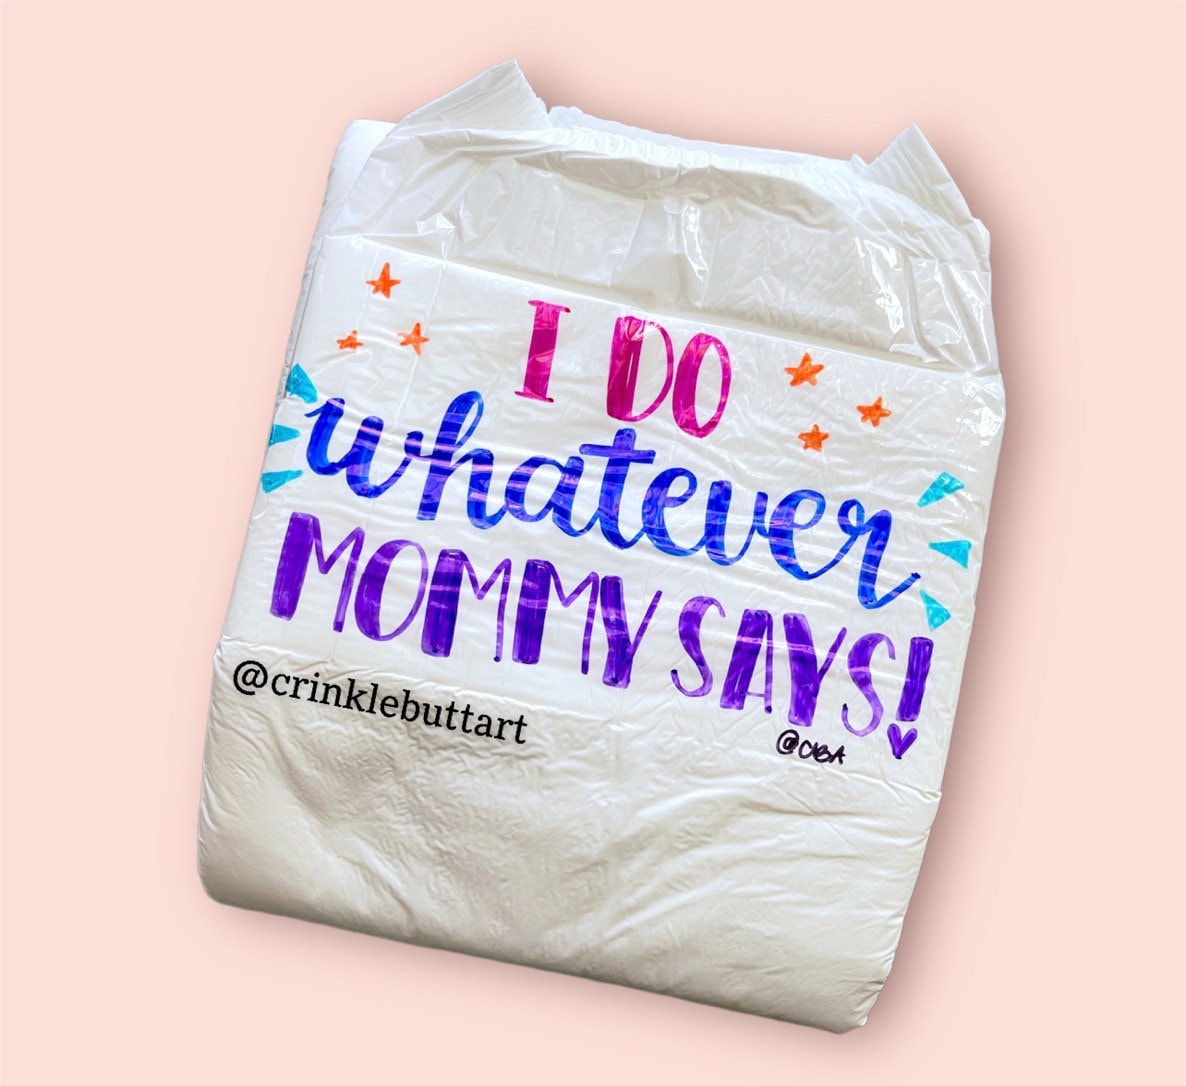 ABDL Adult Baby Diaper, “I Do Whatever Mommy Says"